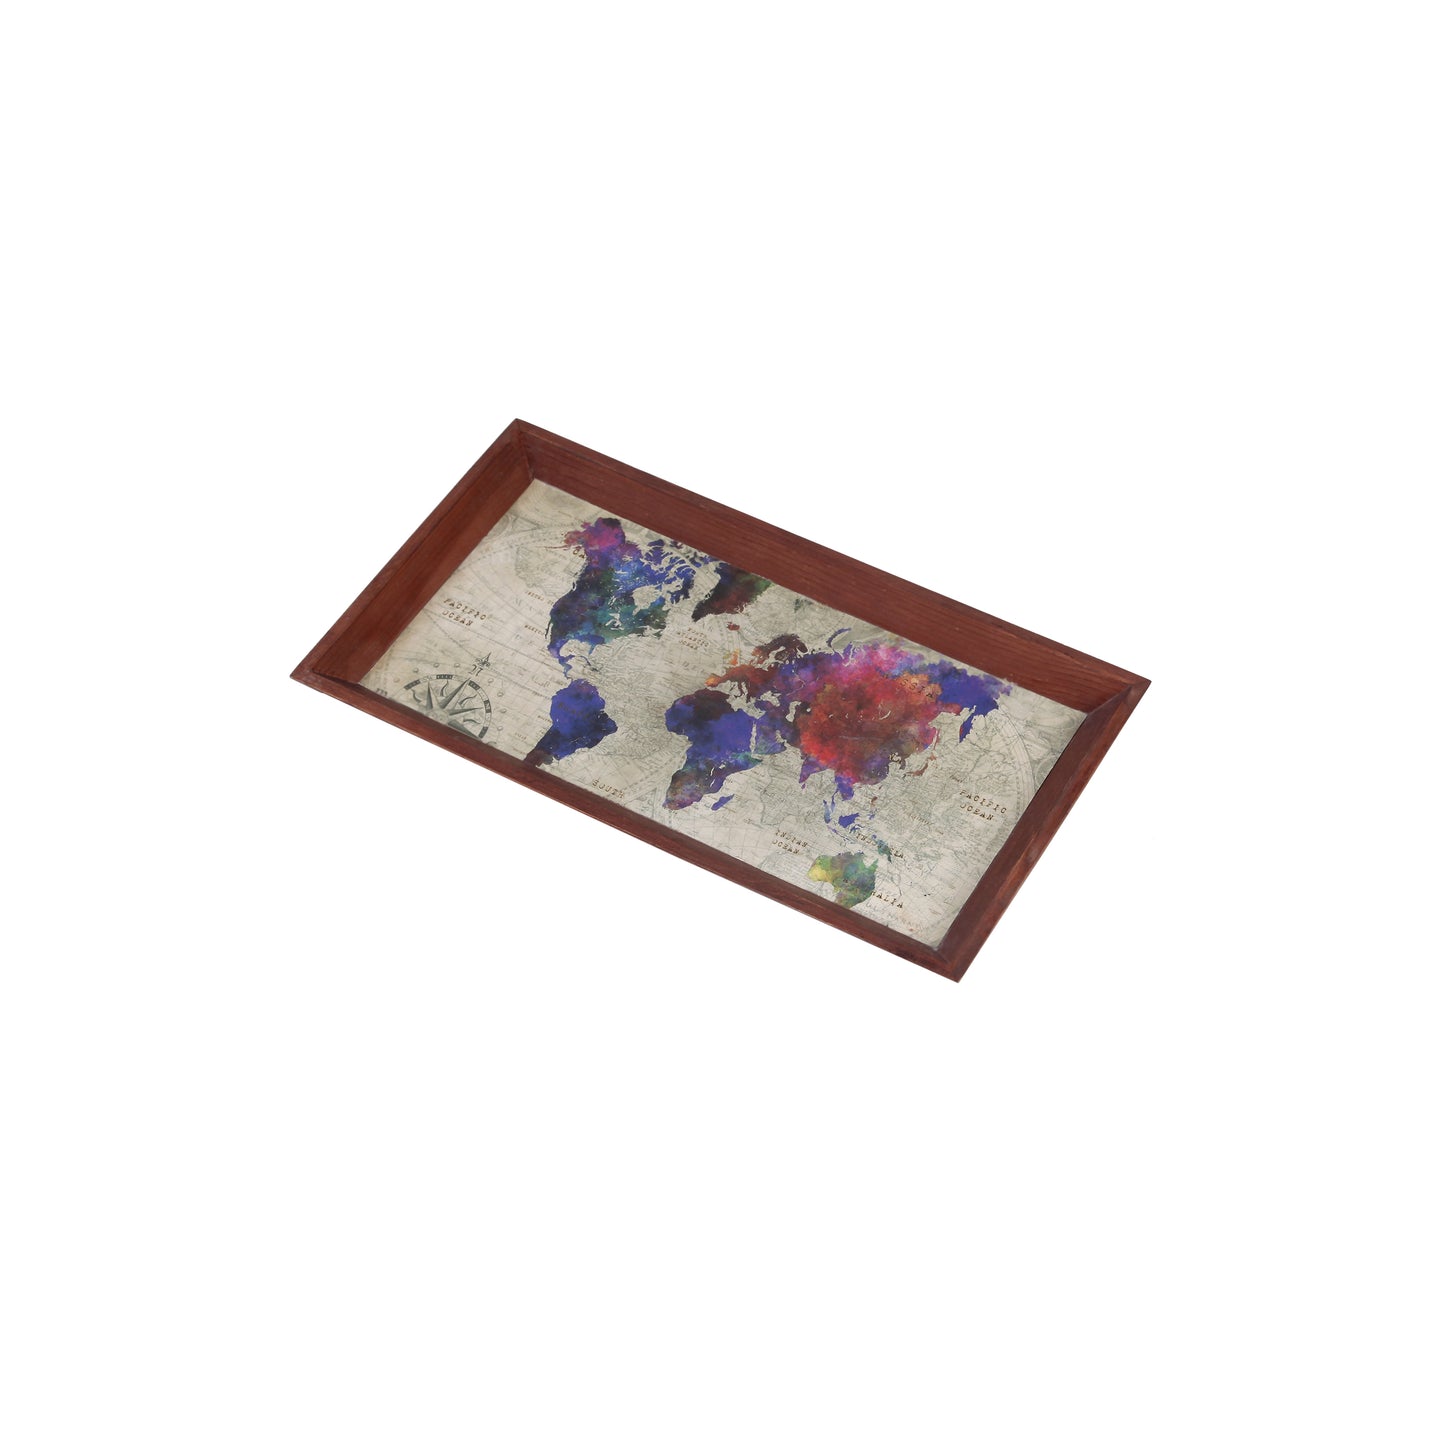 A Tiny Mistake Atlas Rectangle Wooden Serving Tray, 35 x 20 x 2 cm